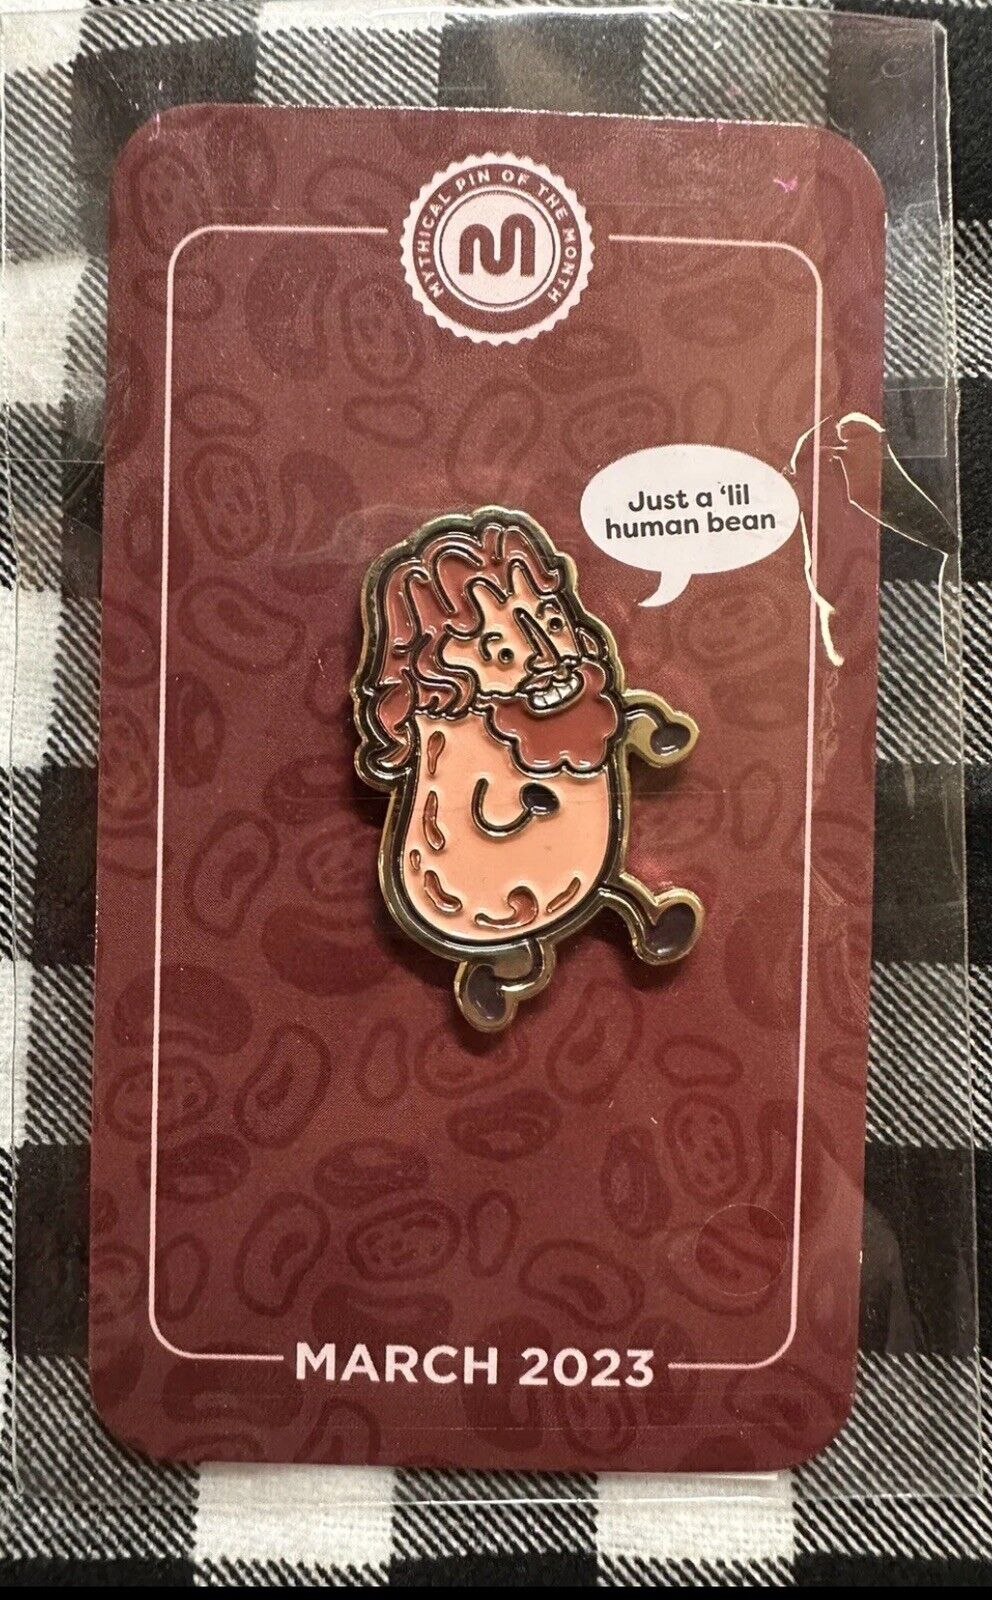 Good Mythical Morning GMM Pin Of The Month: March 2023 Rhett The Human Bean